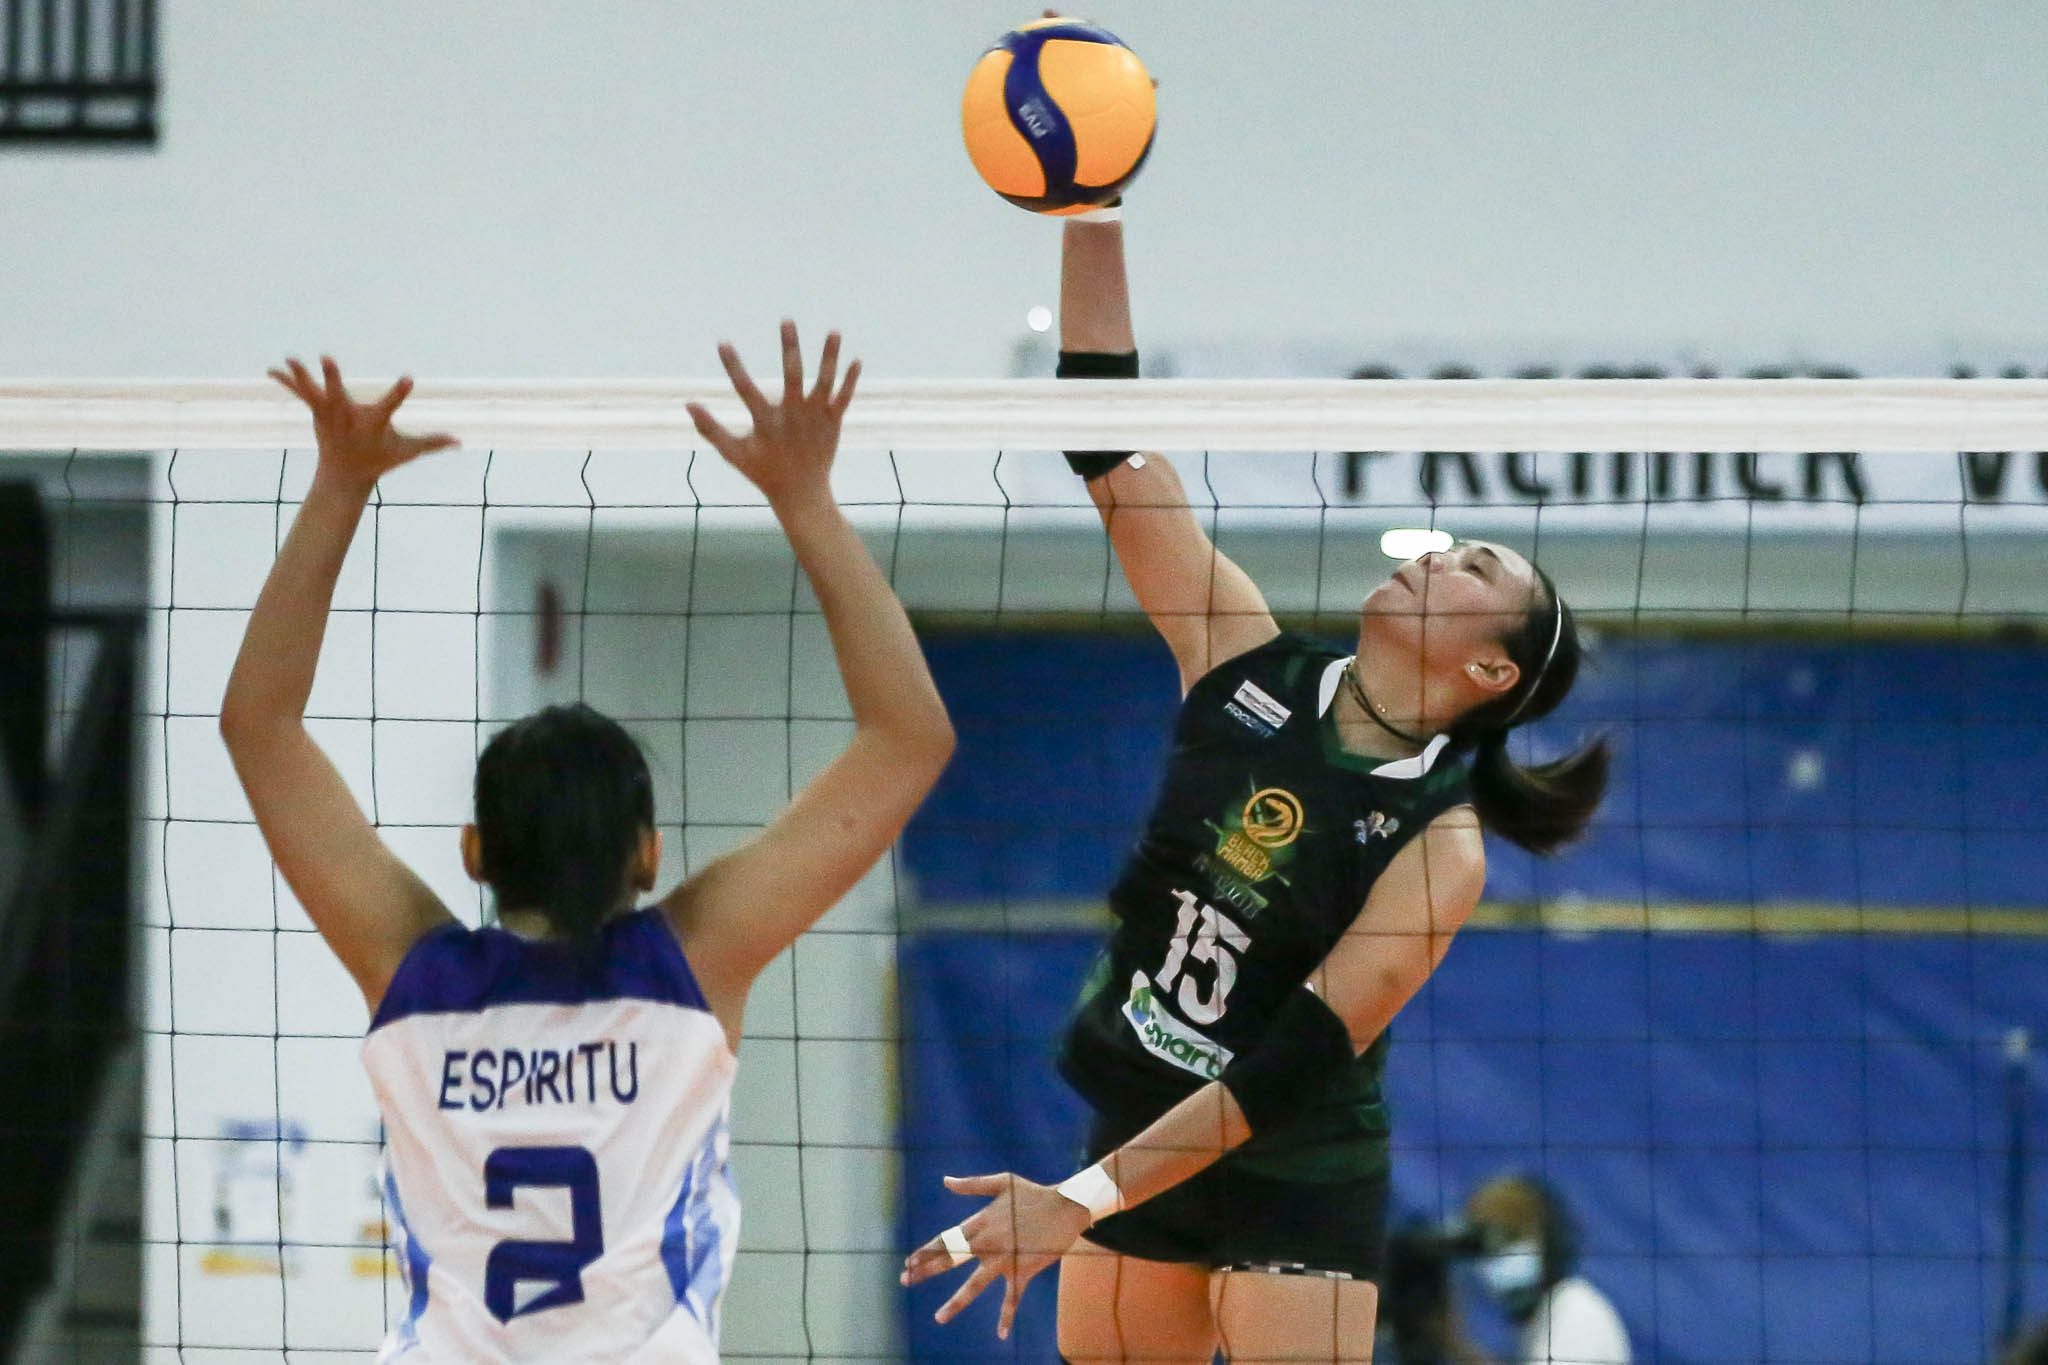 Army seizes momentum with huge 3rd set run, downs debuting BaliPure